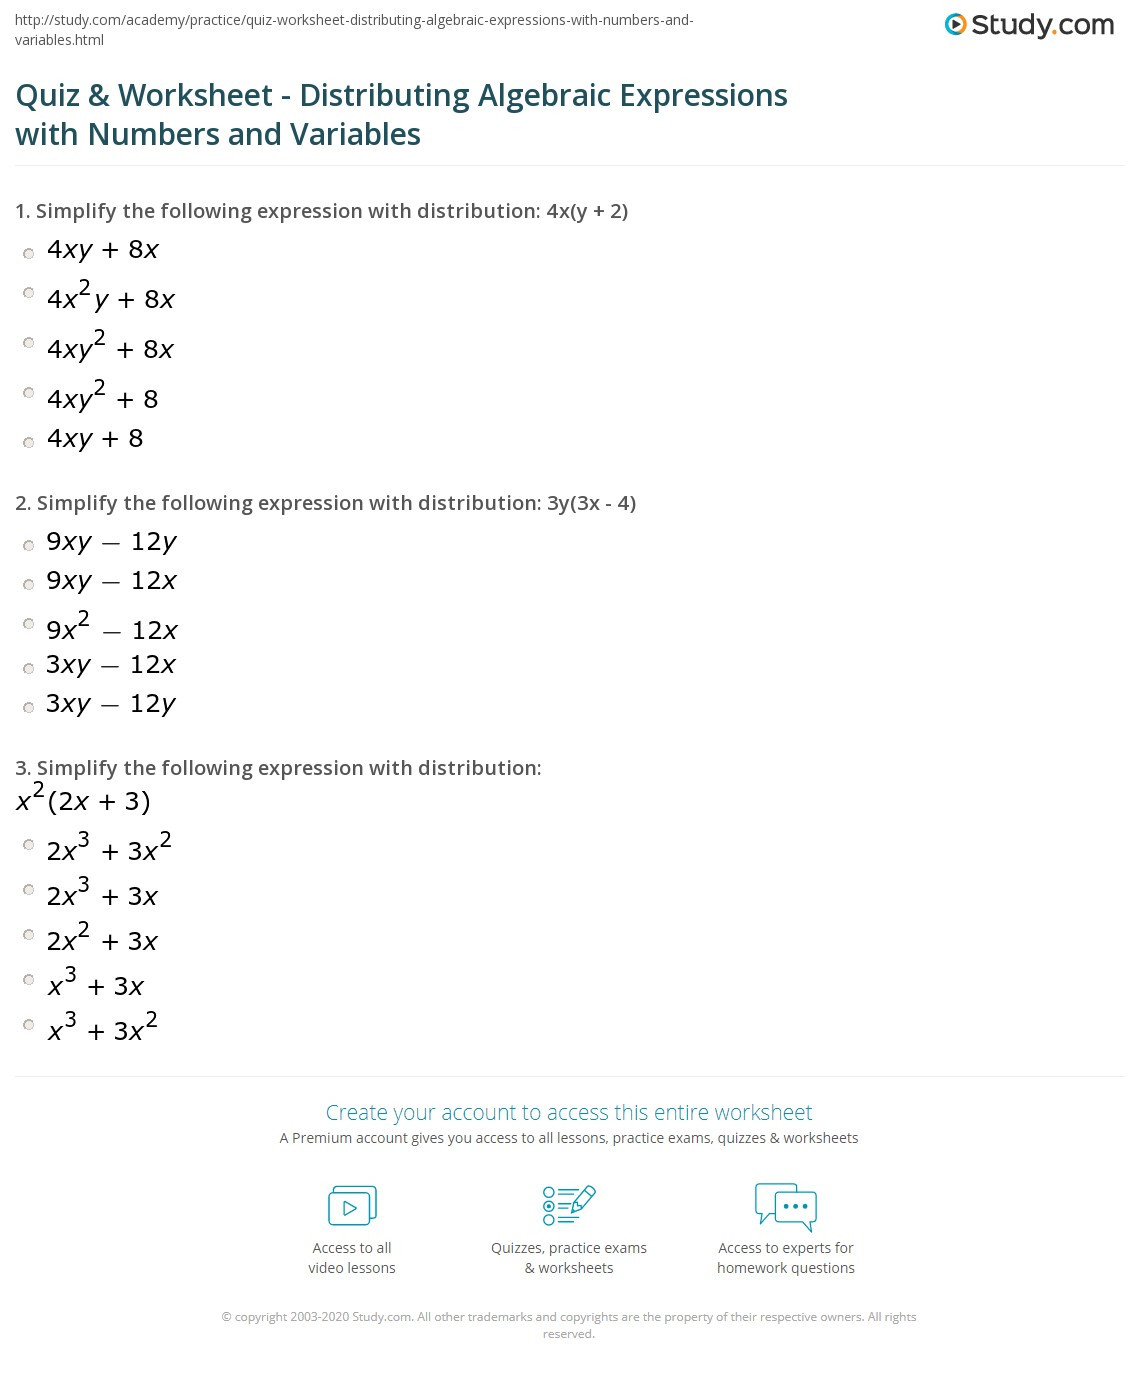 Distributive Property with Variables Worksheet Quiz &amp; Worksheet Distributing Algebraic Expressions with